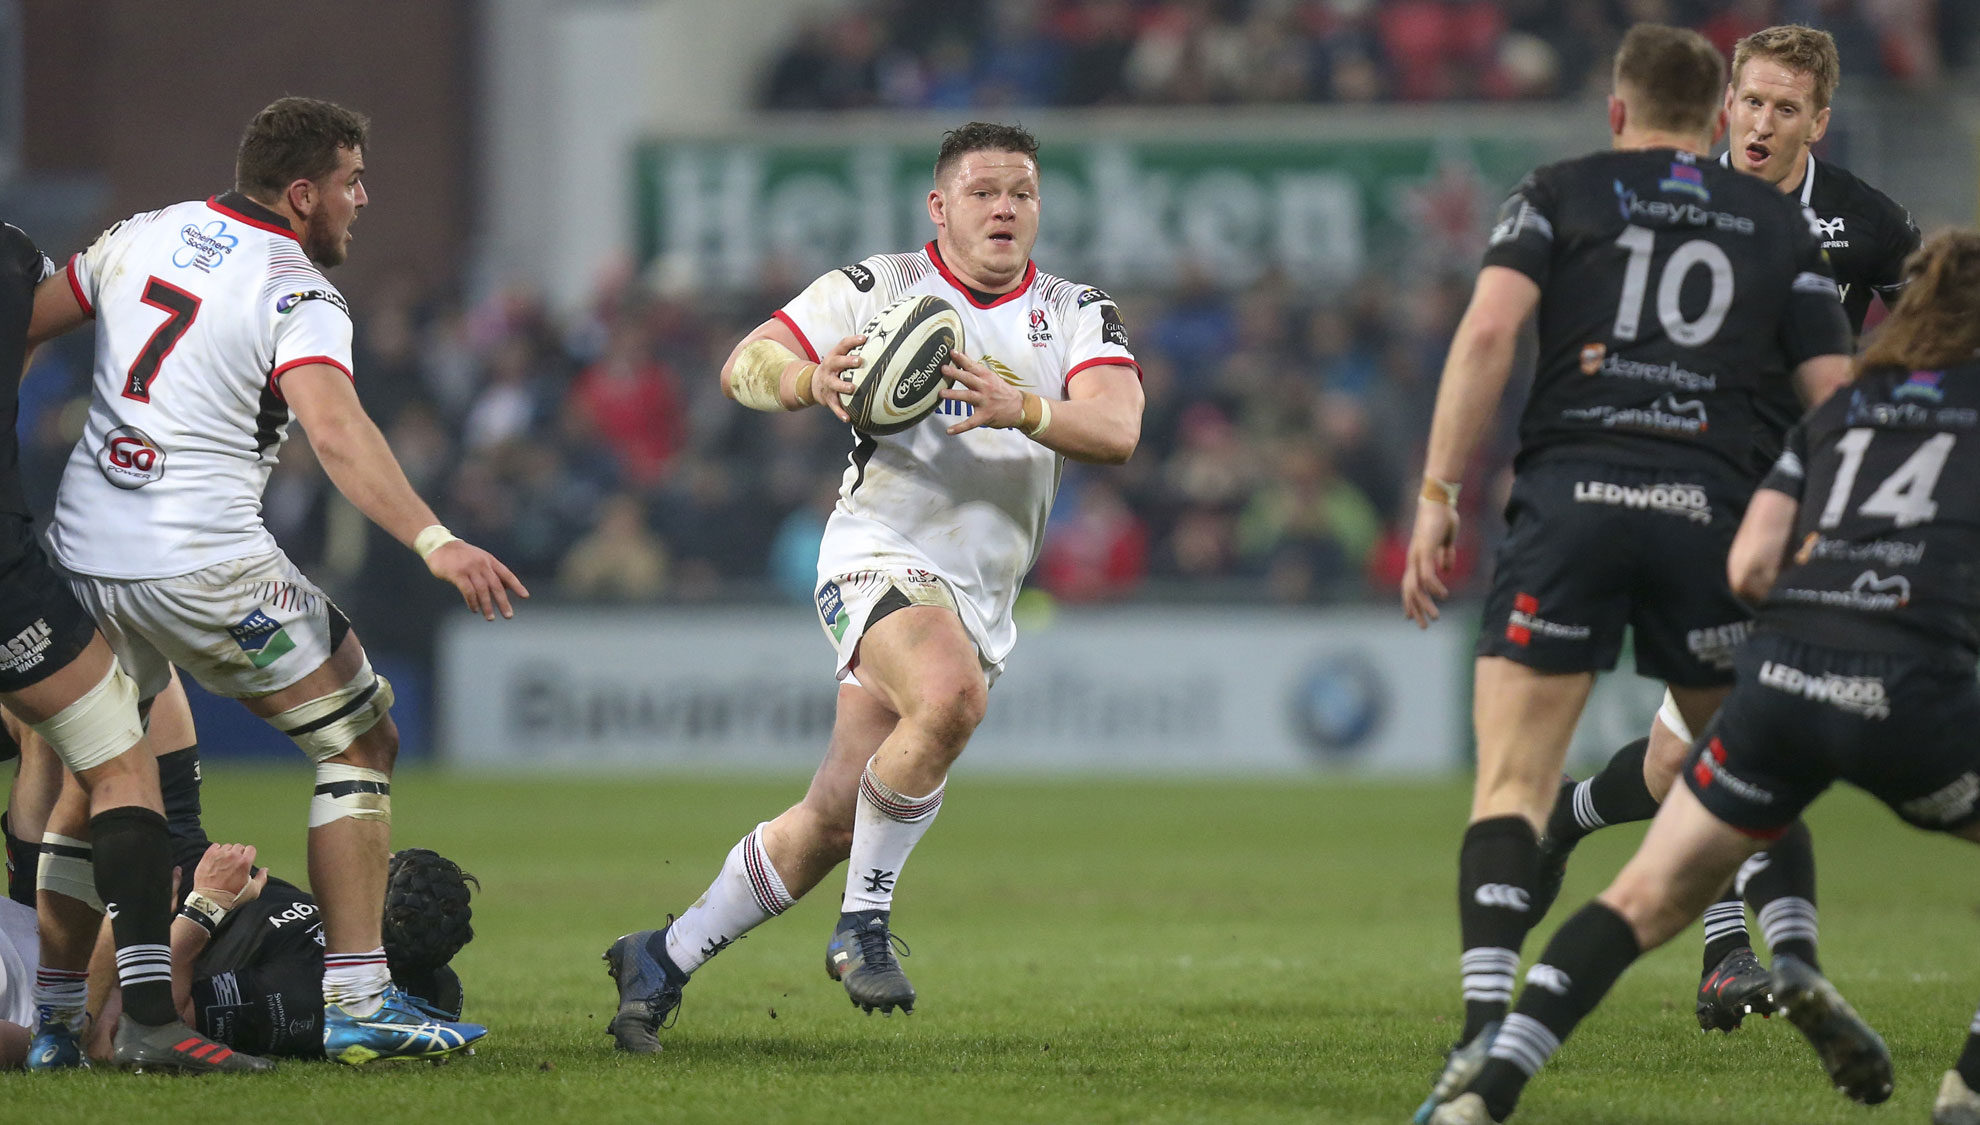 Ross playing for Ulster